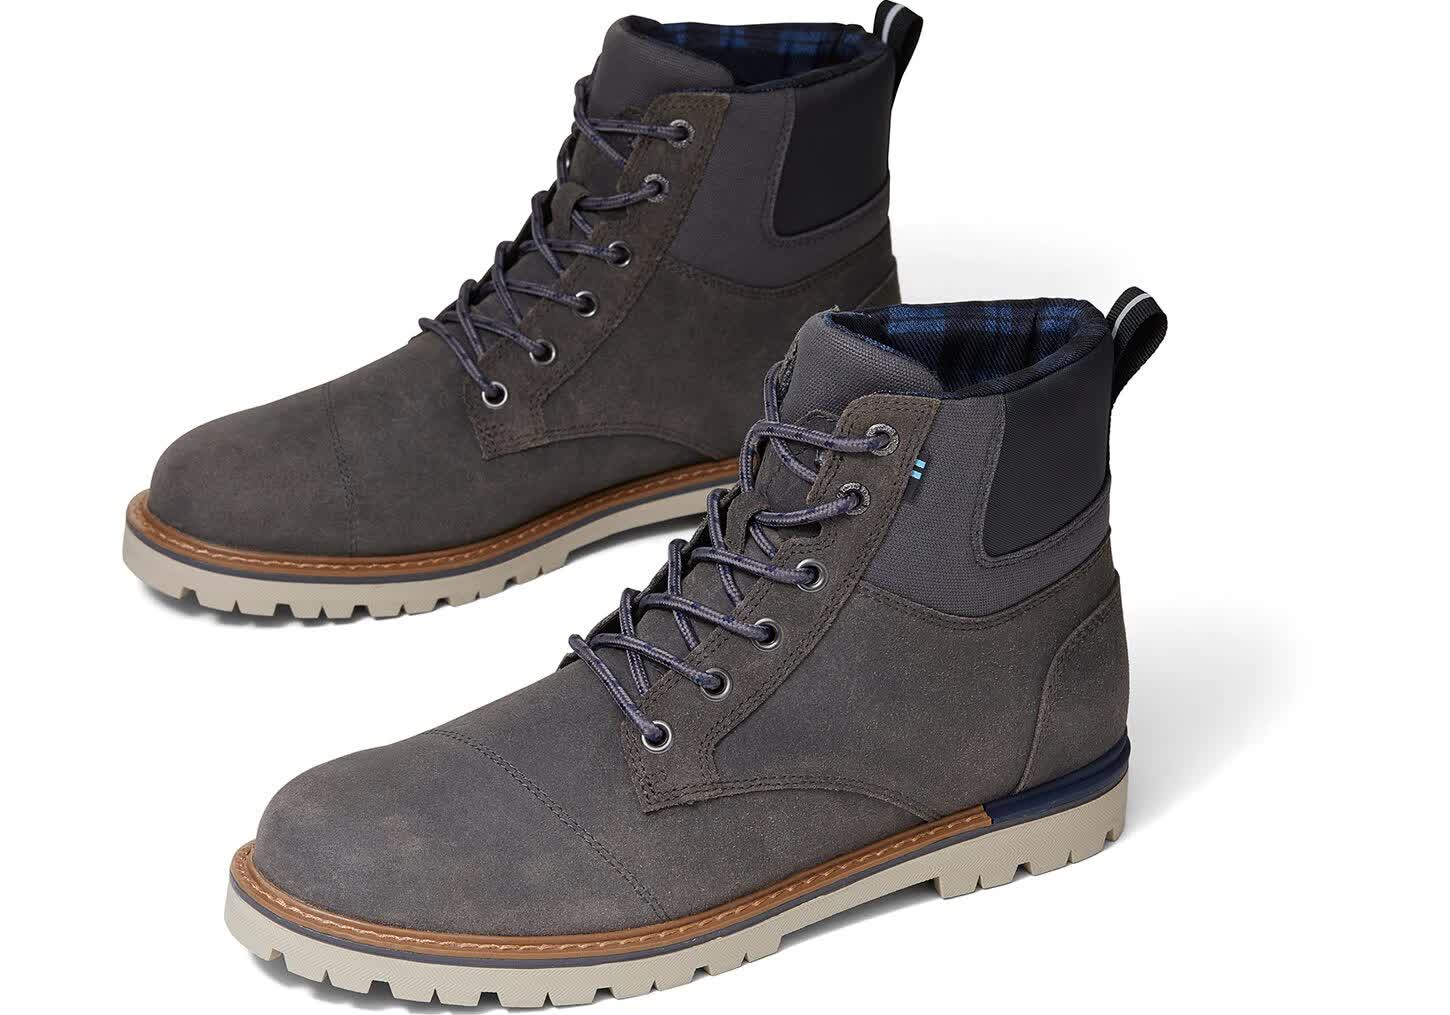 woocommerce-673321-2209615.cloudwaysapps.com-toms-mens-grey-suede-ashland-waterproof-boots